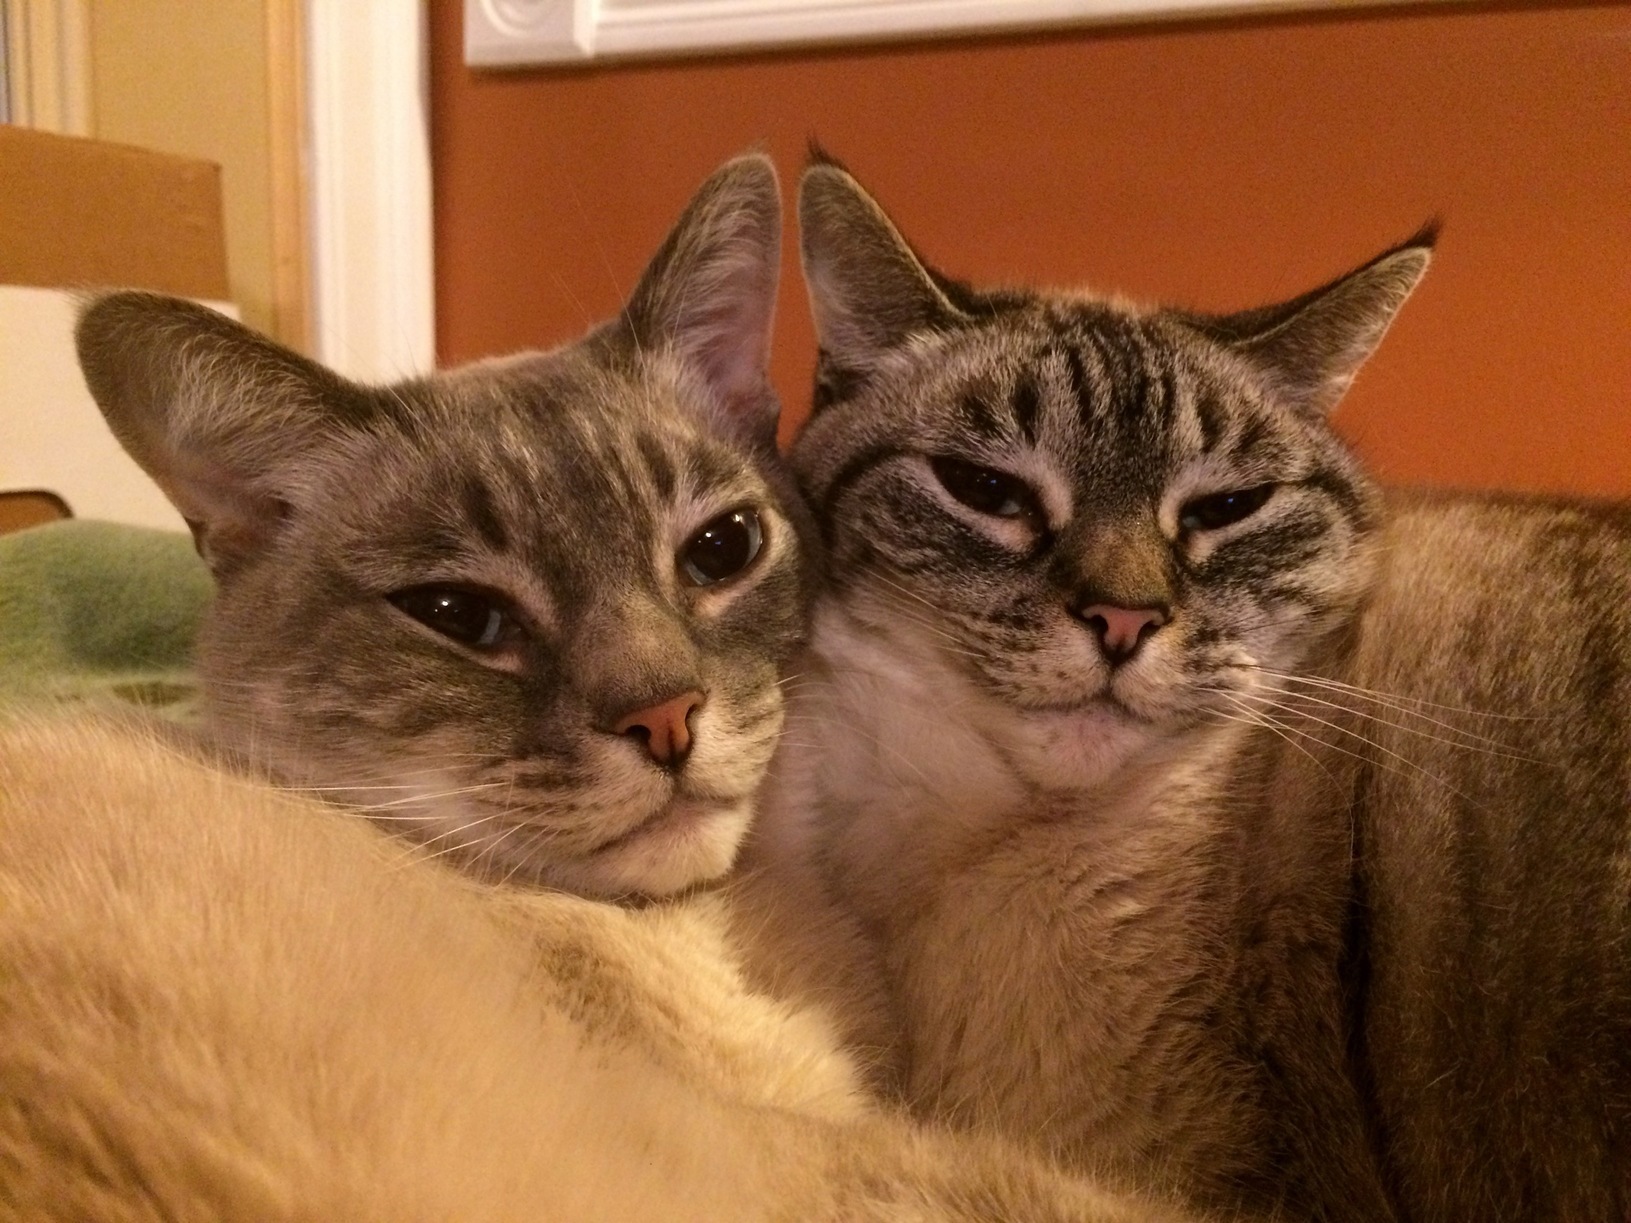 My cats turned 10 today. they woke me up early to make sure i knew. happy birthday